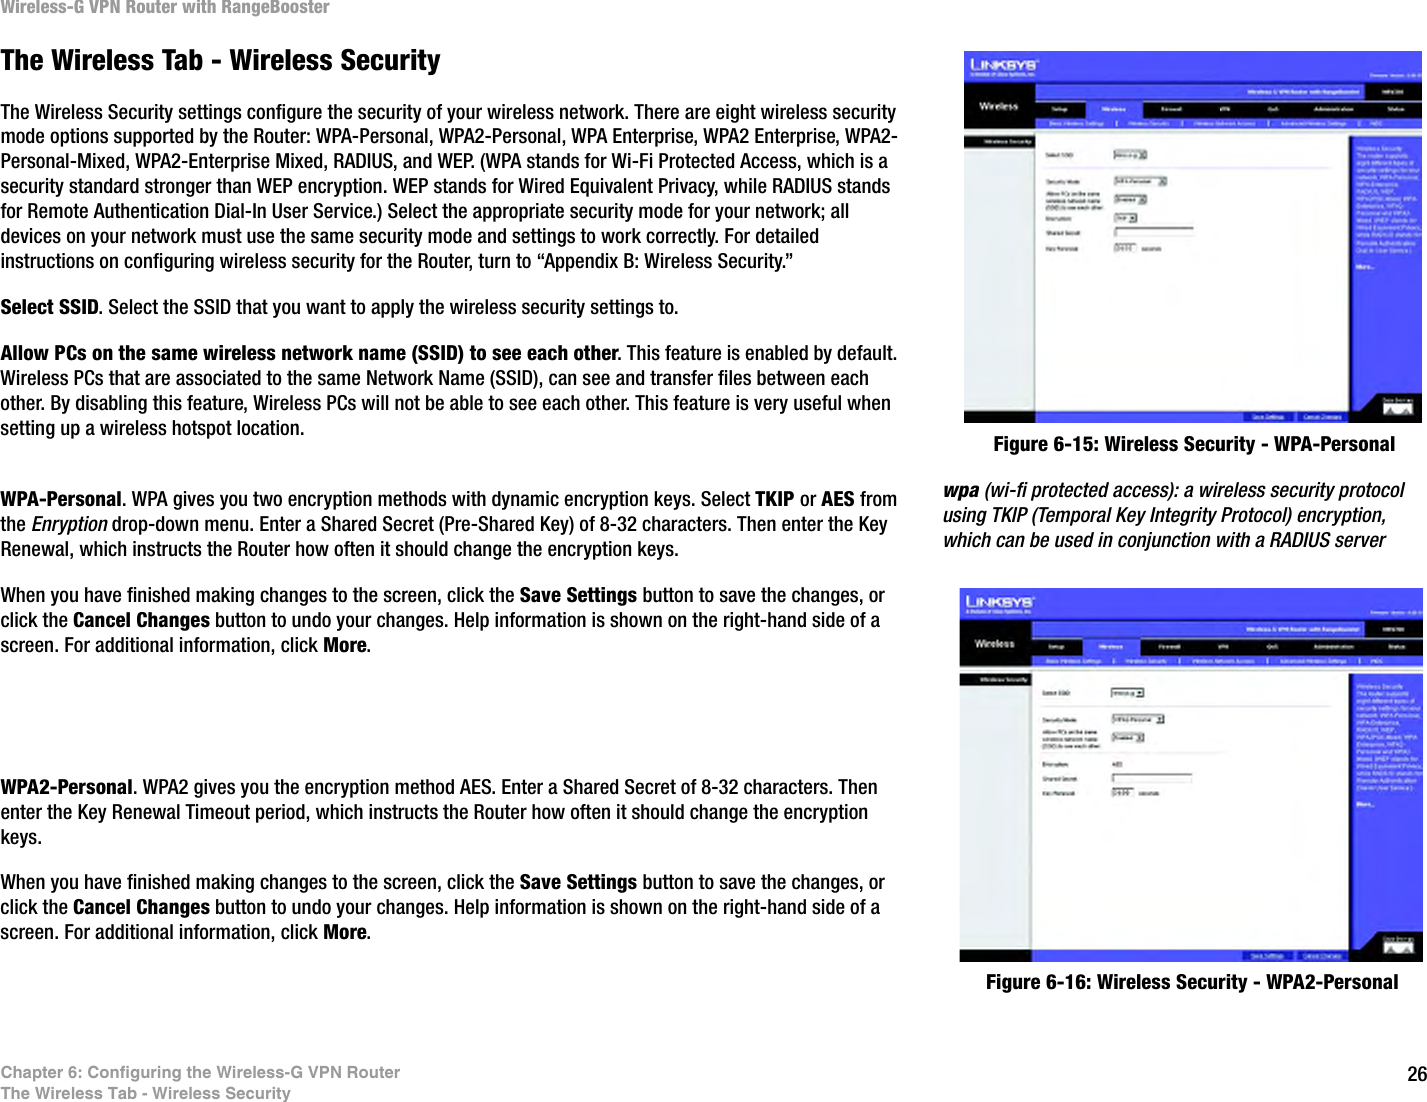 26Chapter 6: Configuring the Wireless-G VPN RouterThe Wireless Tab - Wireless SecurityWireless-G VPN Router with RangeBoosterThe Wireless Tab - Wireless SecurityThe Wireless Security settings configure the security of your wireless network. There are eight wireless security mode options supported by the Router: WPA-Personal, WPA2-Personal, WPA Enterprise, WPA2 Enterprise, WPA2-Personal-Mixed, WPA2-Enterprise Mixed, RADIUS, and WEP. (WPA stands for Wi-Fi Protected Access, which is a security standard stronger than WEP encryption. WEP stands for Wired Equivalent Privacy, while RADIUS stands for Remote Authentication Dial-In User Service.) Select the appropriate security mode for your network; all devices on your network must use the same security mode and settings to work correctly. For detailed instructions on configuring wireless security for the Router, turn to “Appendix B: Wireless Security.”Select SSID. Select the SSID that you want to apply the wireless security settings to.Allow PCs on the same wireless network name (SSID) to see each other. This feature is enabled by default. Wireless PCs that are associated to the same Network Name (SSID), can see and transfer files between each other. By disabling this feature, Wireless PCs will not be able to see each other. This feature is very useful when setting up a wireless hotspot location.WPA-Personal. WPA gives you two encryption methods with dynamic encryption keys. Select TKIP or AES from the Enryption drop-down menu. Enter a Shared Secret (Pre-Shared Key) of 8-32 characters. Then enter the Key Renewal, which instructs the Router how often it should change the encryption keys.When you have finished making changes to the screen, click the Save Settings button to save the changes, or click the Cancel Changes button to undo your changes. Help information is shown on the right-hand side of a screen. For additional information, click More.WPA2-Personal. WPA2 gives you the encryption method AES. Enter a Shared Secret of 8-32 characters. Then enter the Key Renewal Timeout period, which instructs the Router how often it should change the encryption keys.When you have finished making changes to the screen, click the Save Settings button to save the changes, or click the Cancel Changes button to undo your changes. Help information is shown on the right-hand side of a screen. For additional information, click More.Figure 6-15: Wireless Security - WPA-PersonalFigure 6-16: Wireless Security - WPA2-Personalwpa (wi-fi protected access): a wireless security protocol using TKIP (Temporal Key Integrity Protocol) encryption, which can be used in conjunction with a RADIUS server